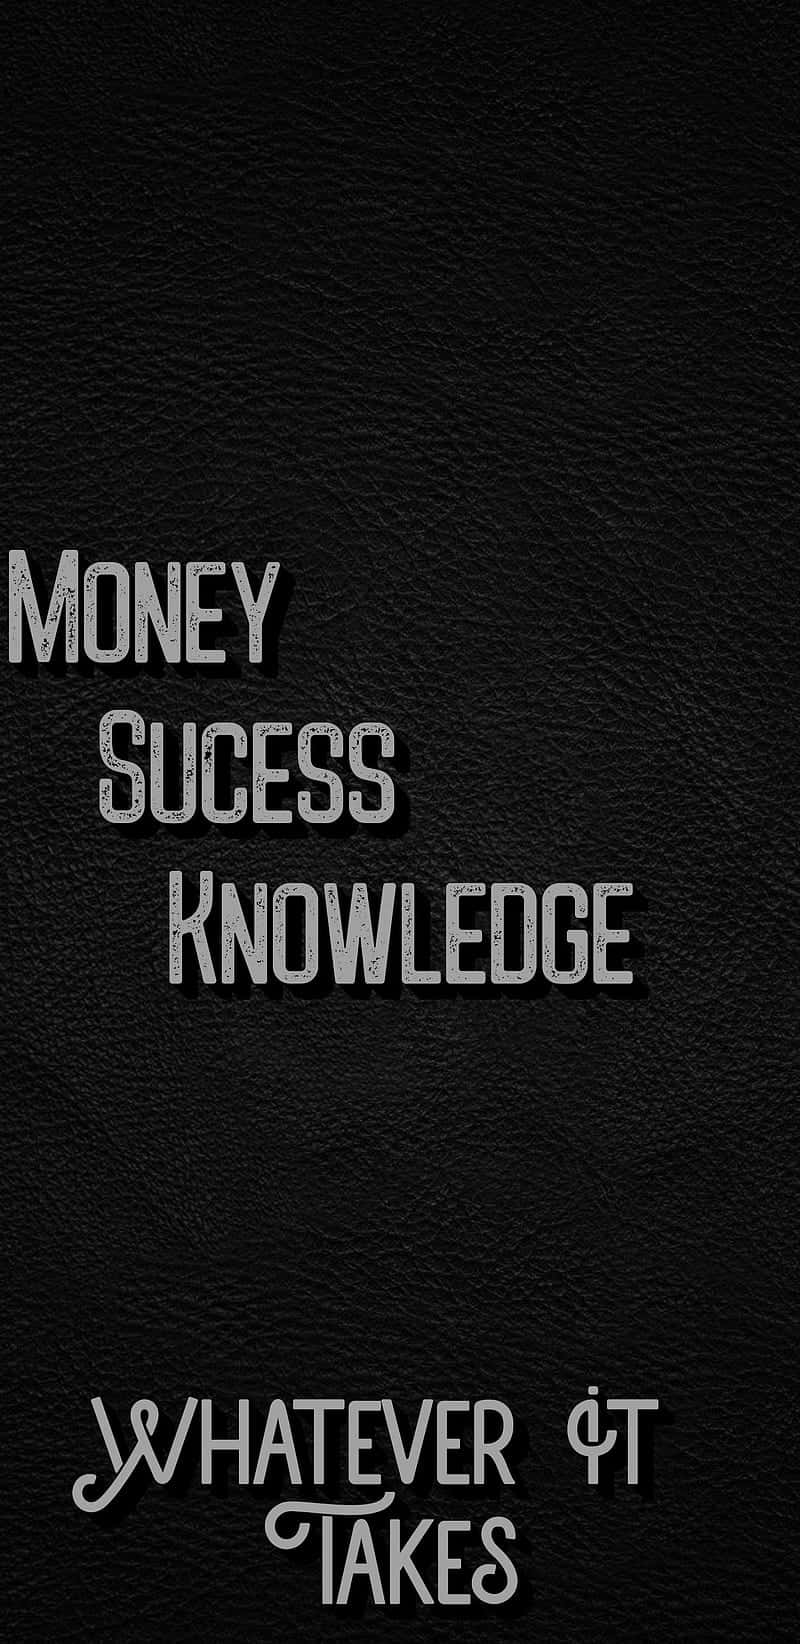 Whatever It Takes Money Sucess Knowledge